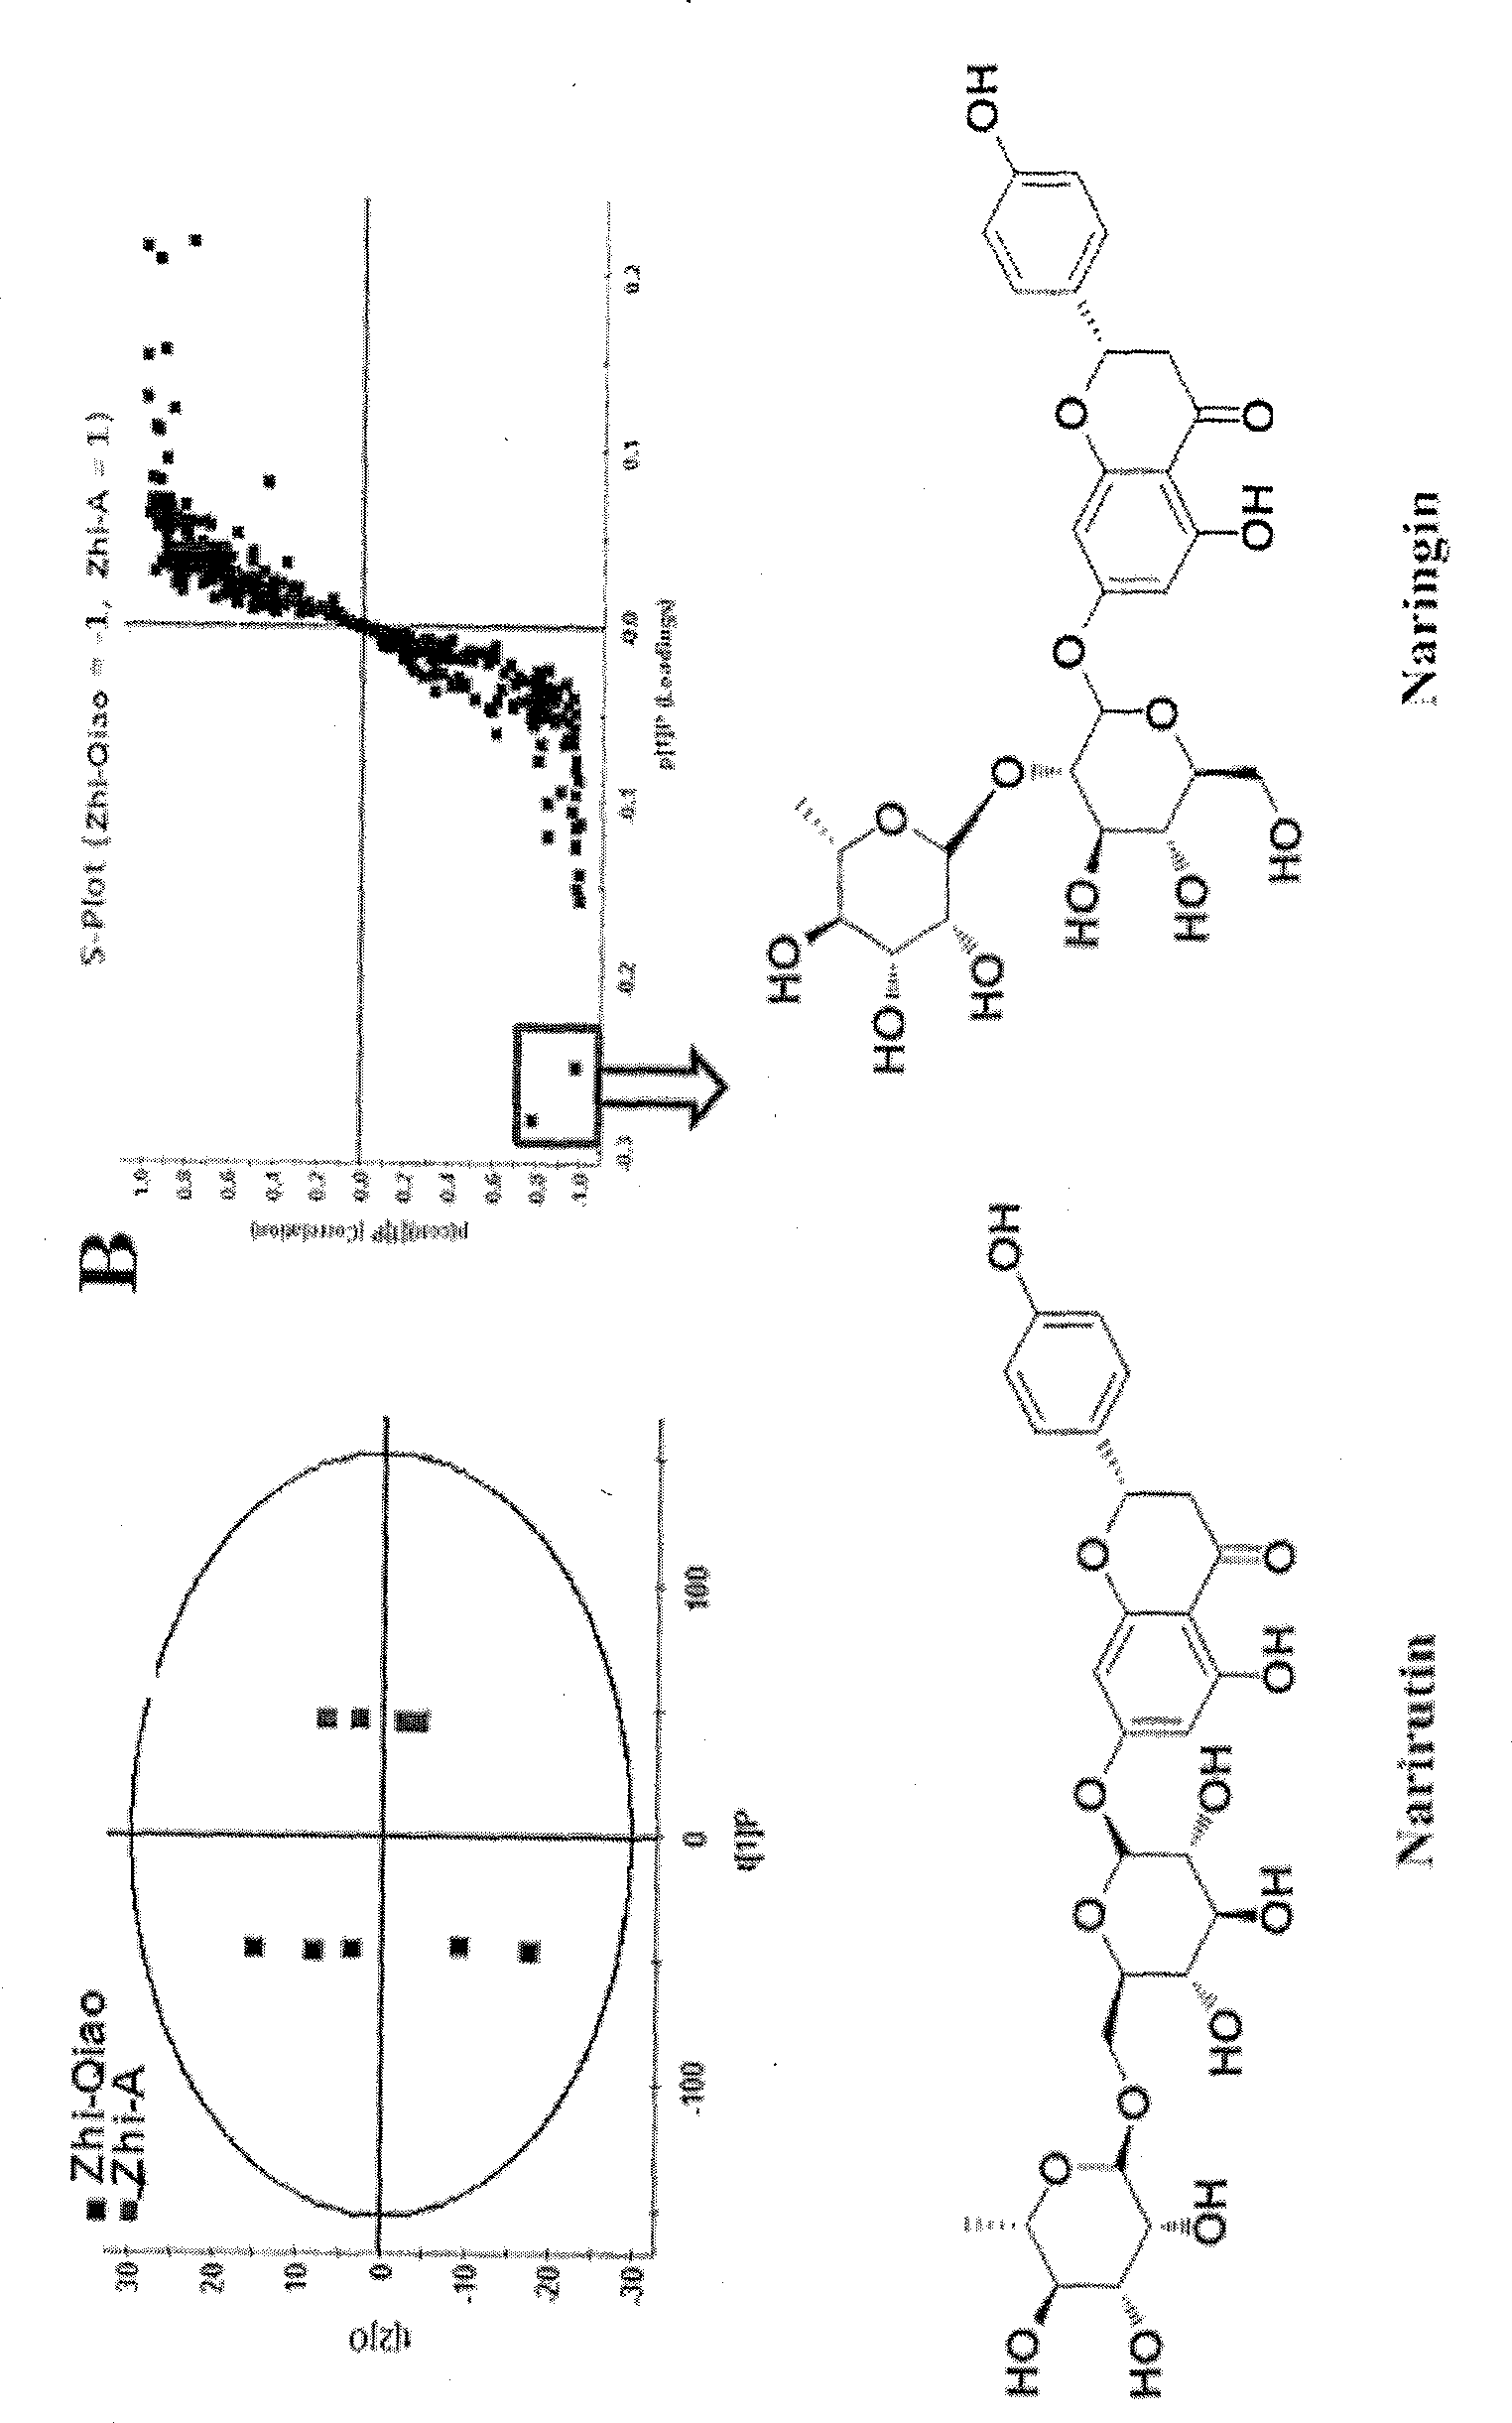 Method for screening active components from traditional Chinese medicine or natural medicine complex system and purposes thereof